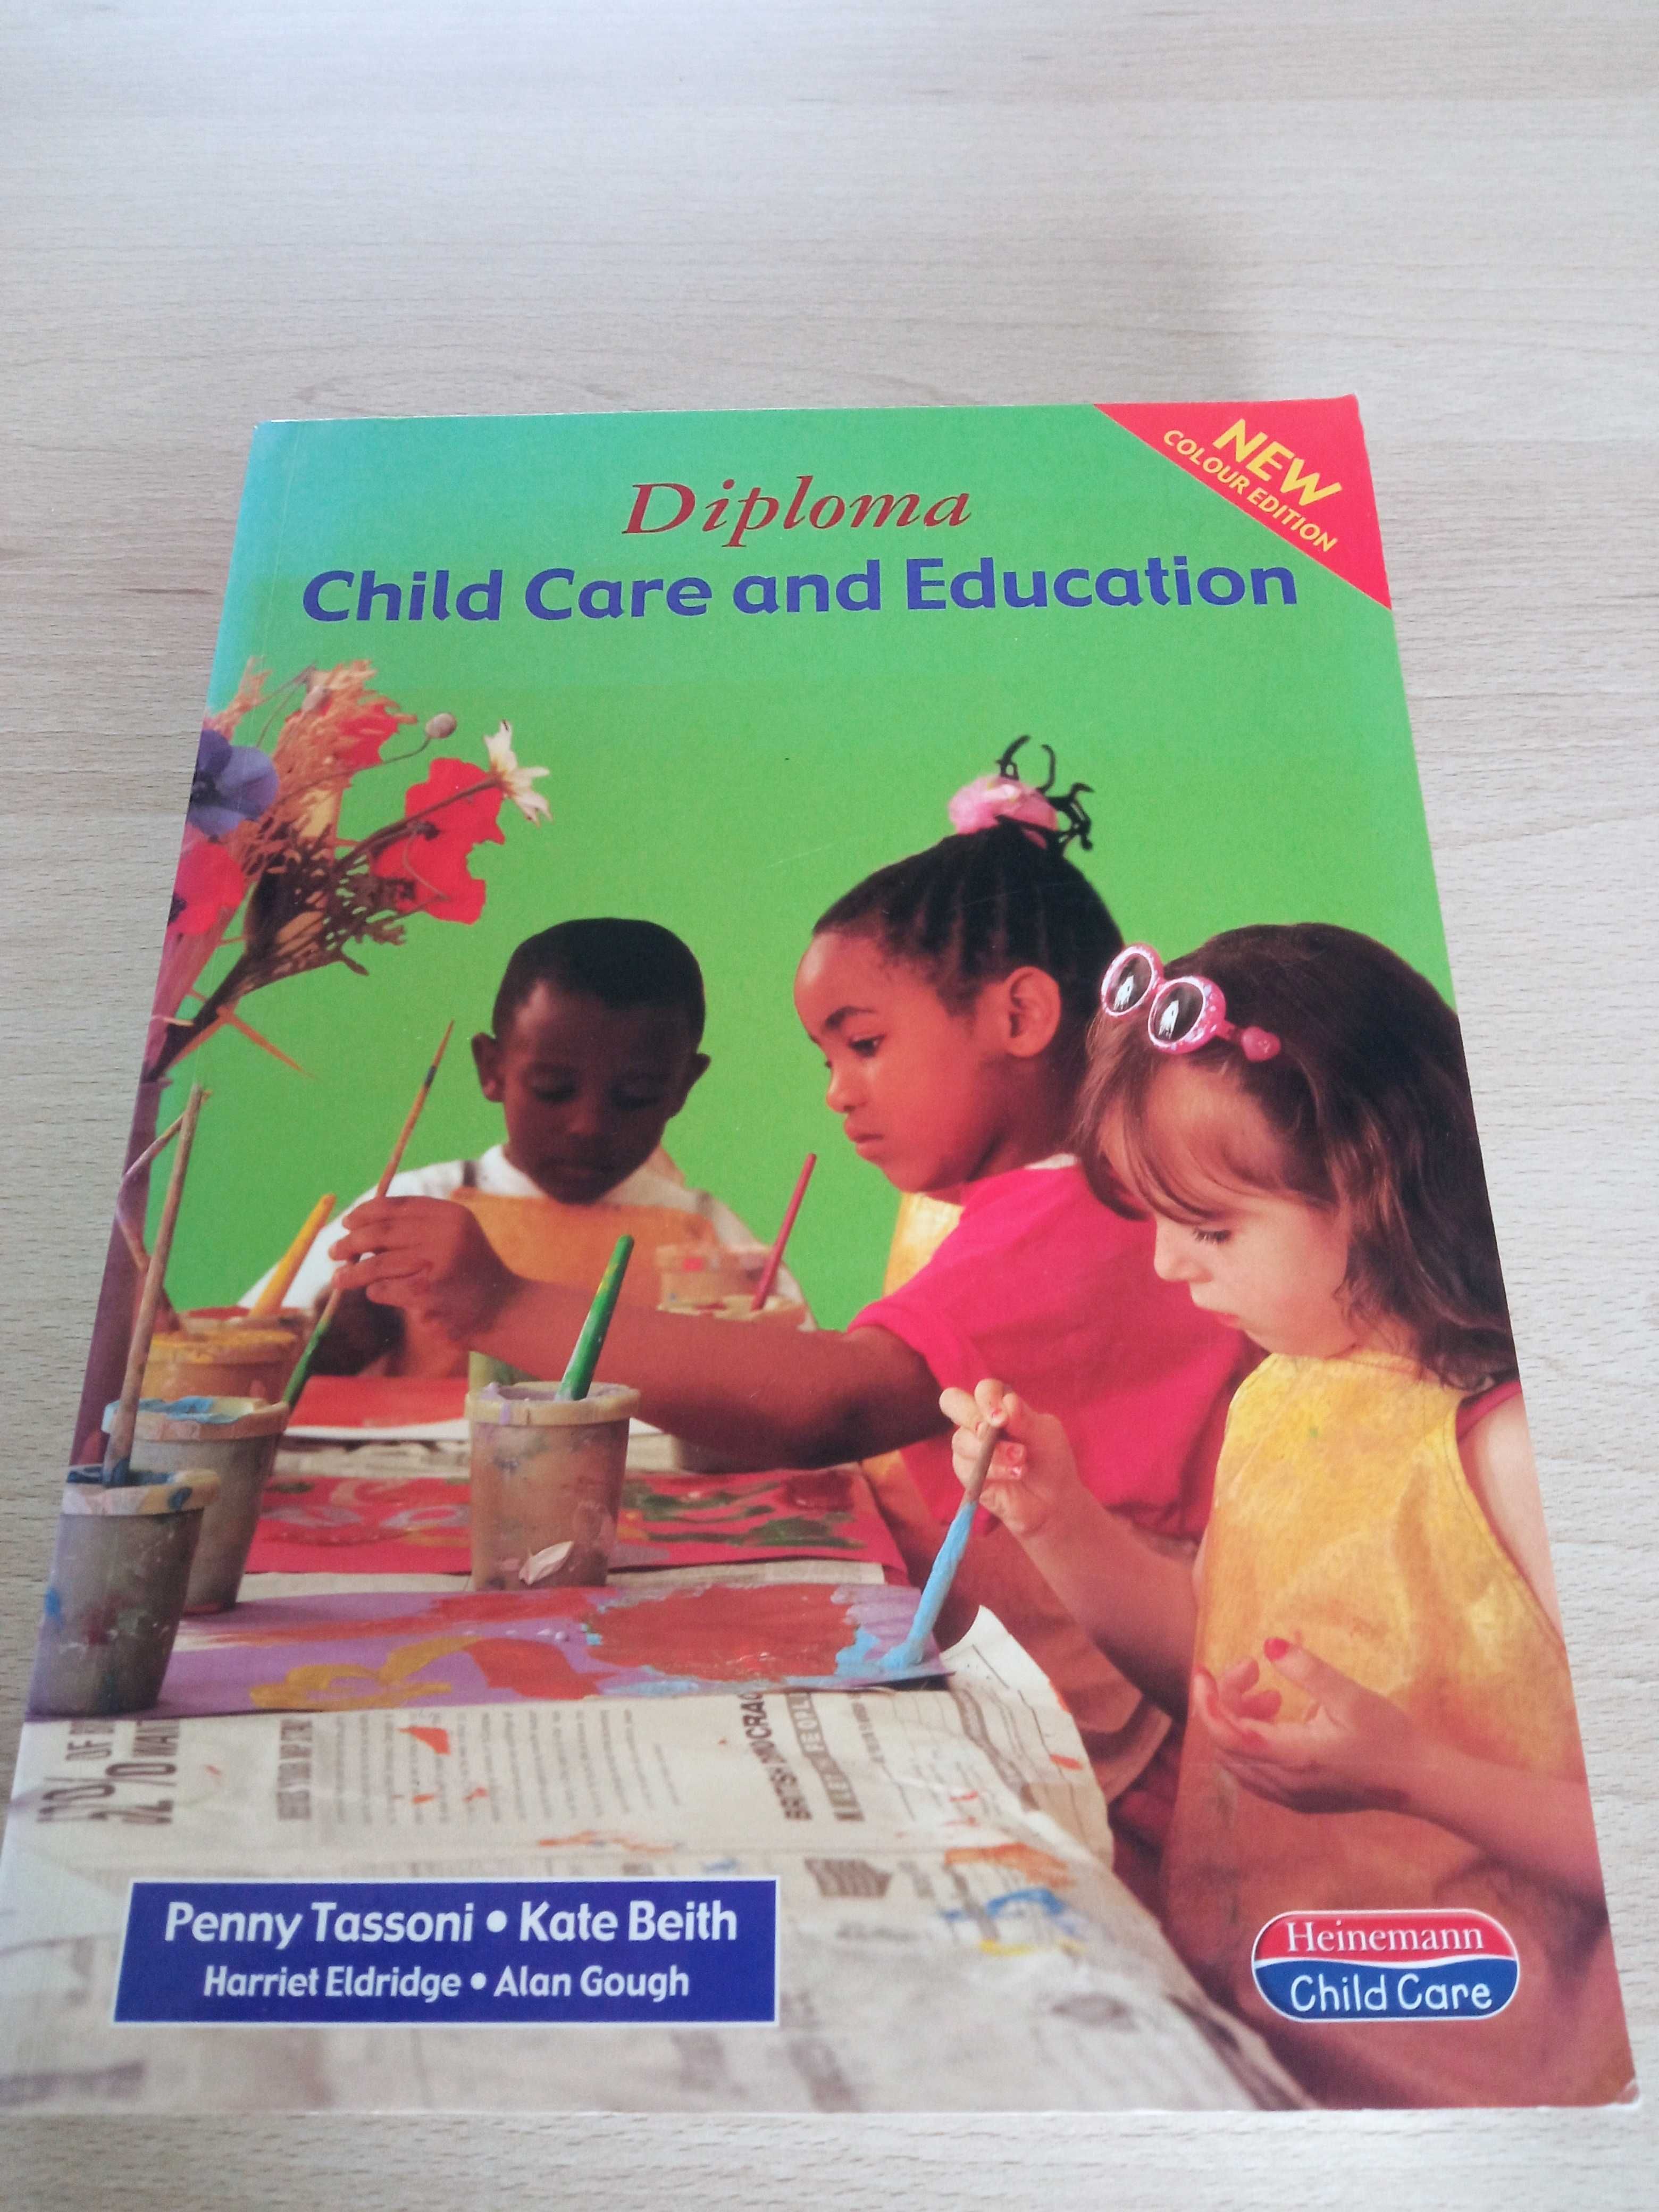 Diploma. Child Care and Education.